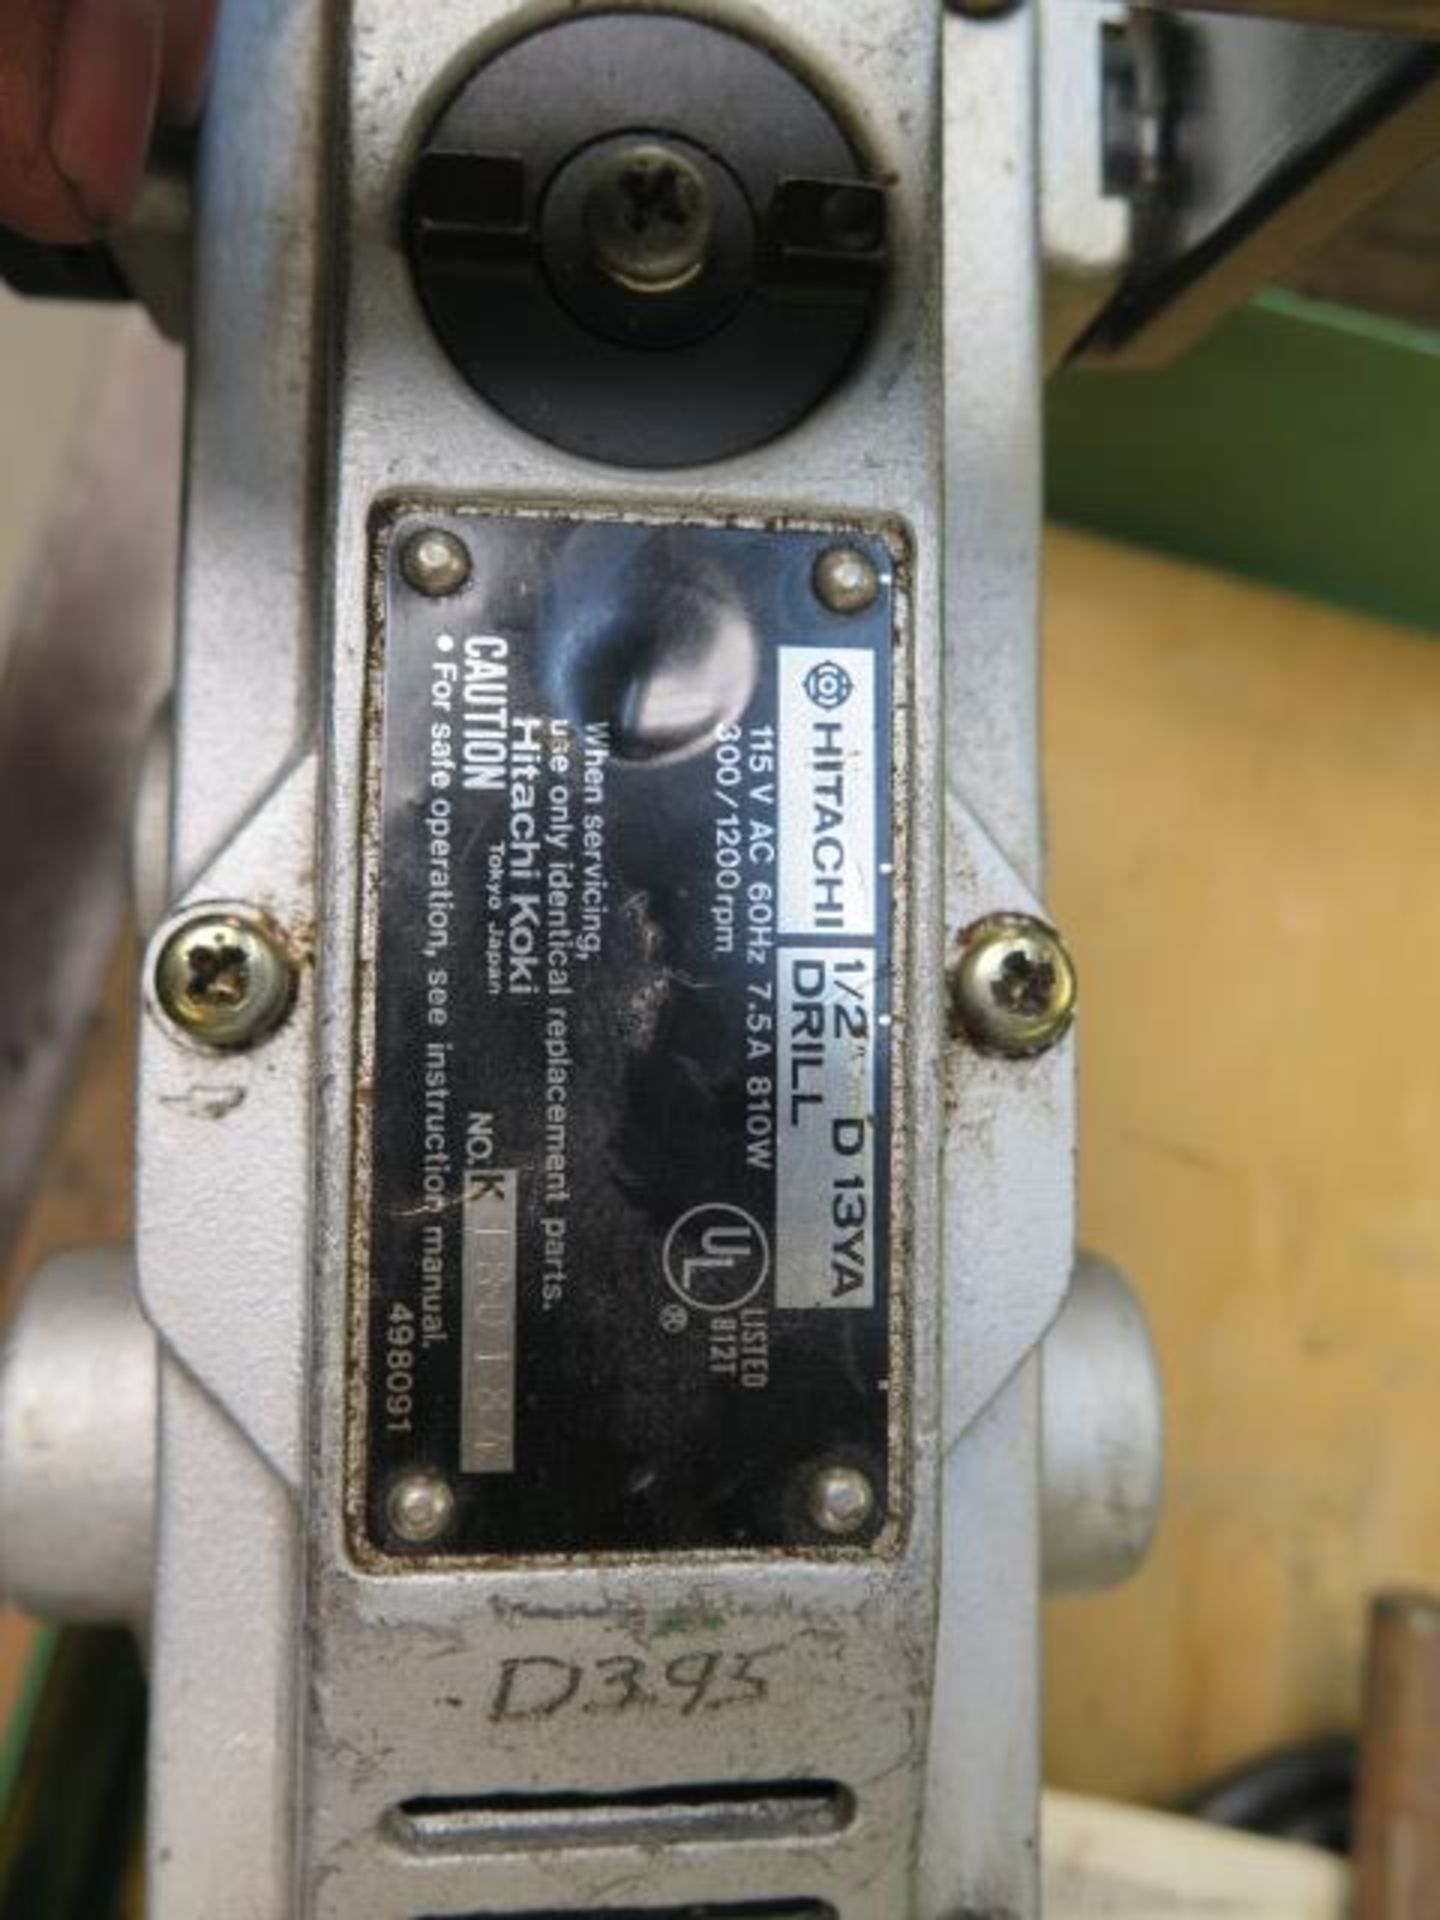 Hitachi 1/2" Angle Drill (SOLD AS-IS - NO WARRANTY) - Image 5 of 5